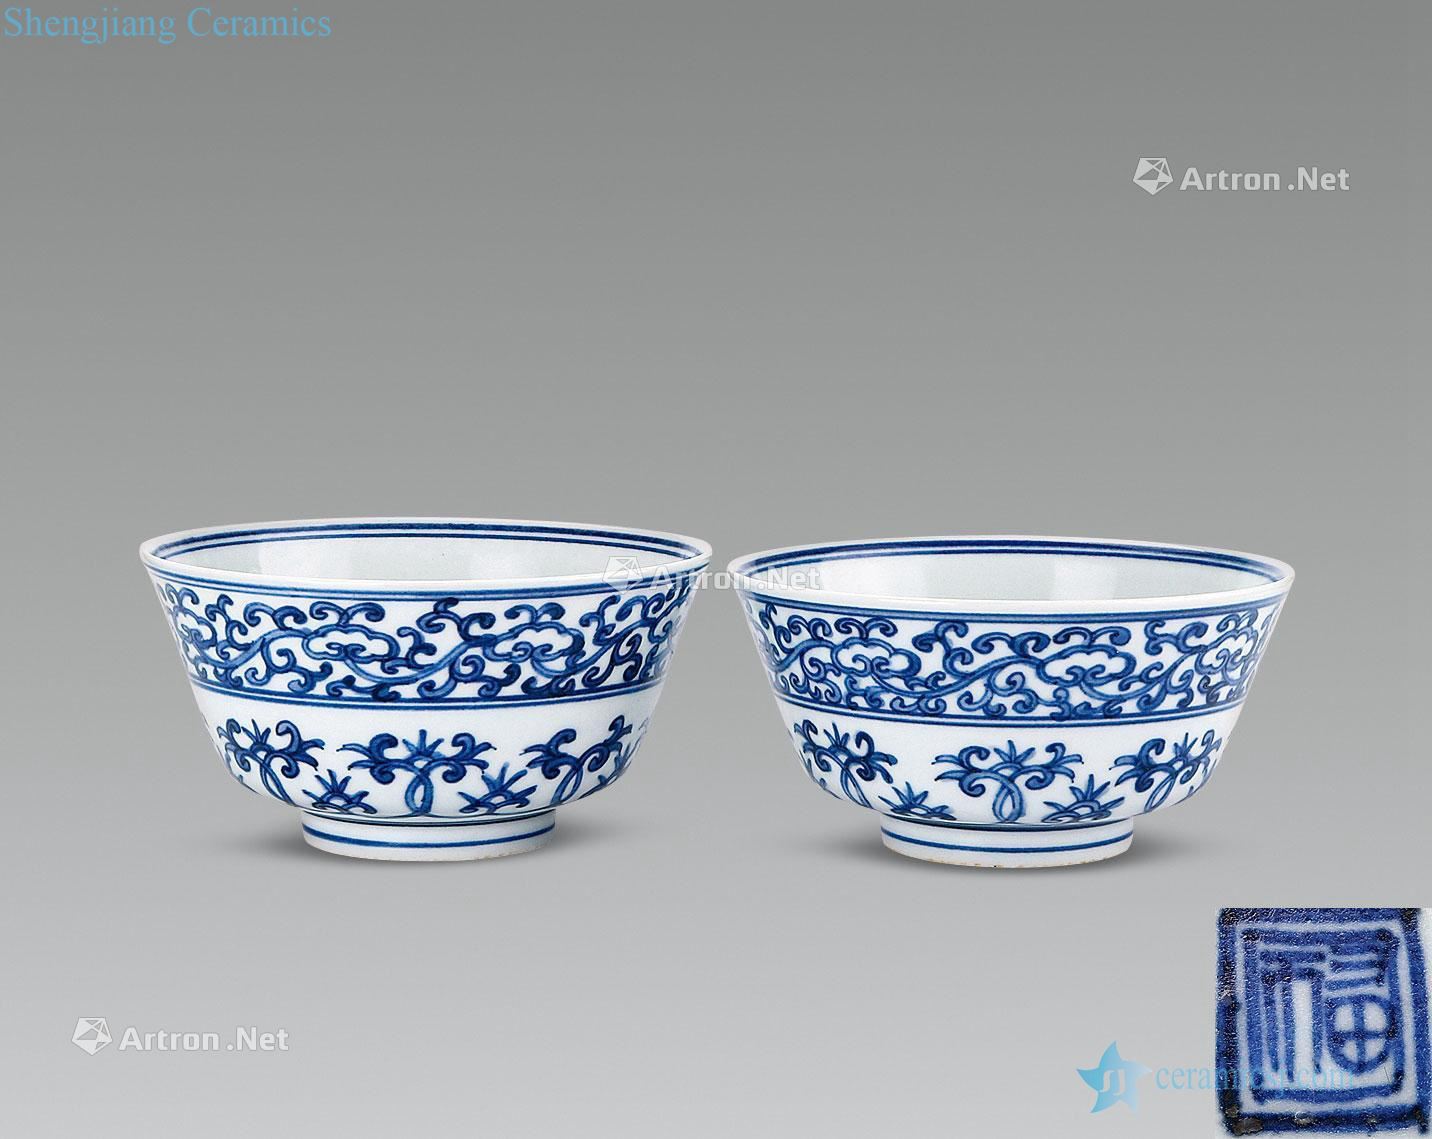 Ming Blue and white flower bowls bound branches (a)